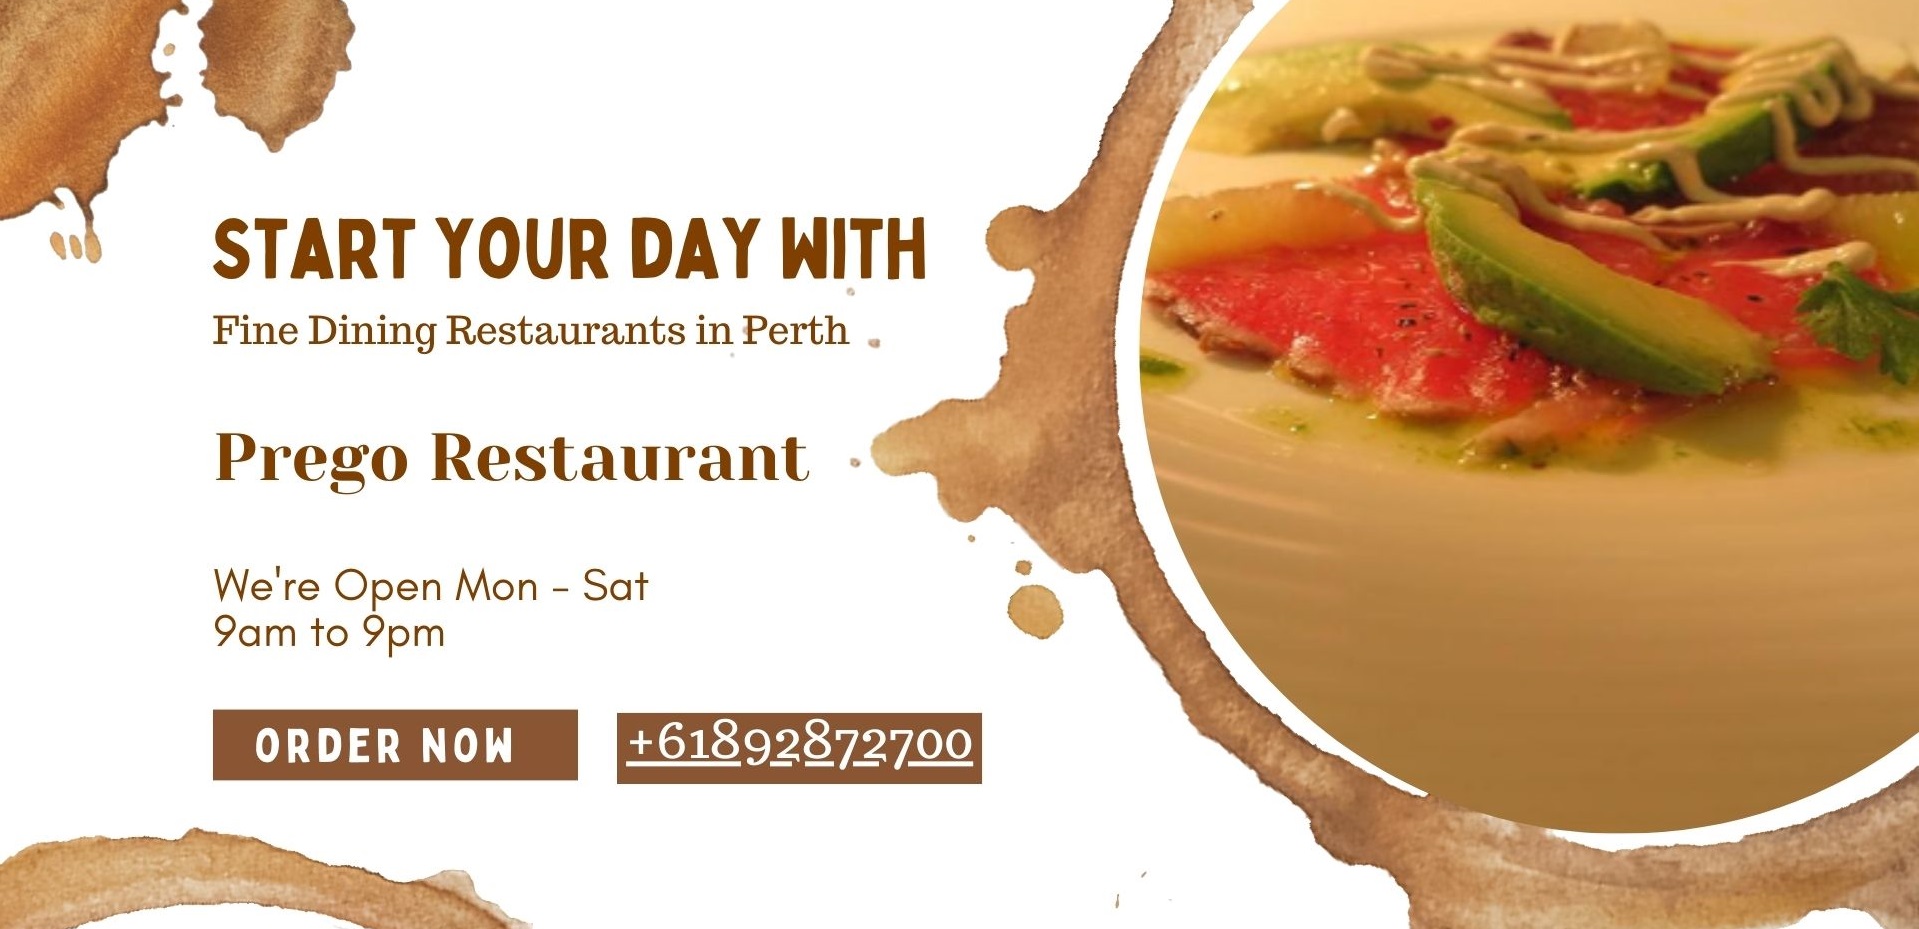 Start your day with Prego Italian Restaurants in Perth with Fine Dining.